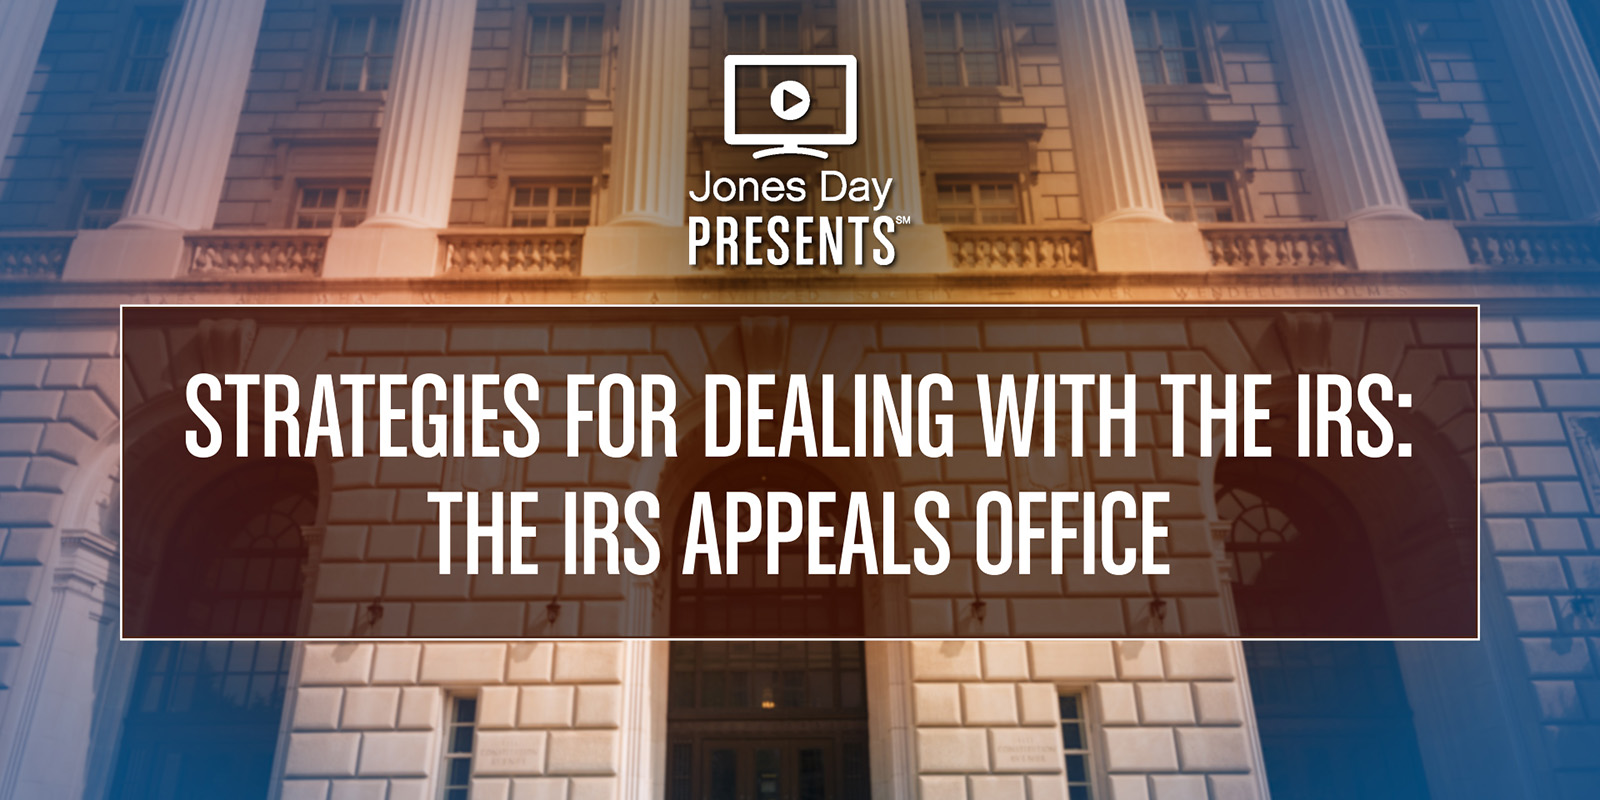 The IRS Appeals Office